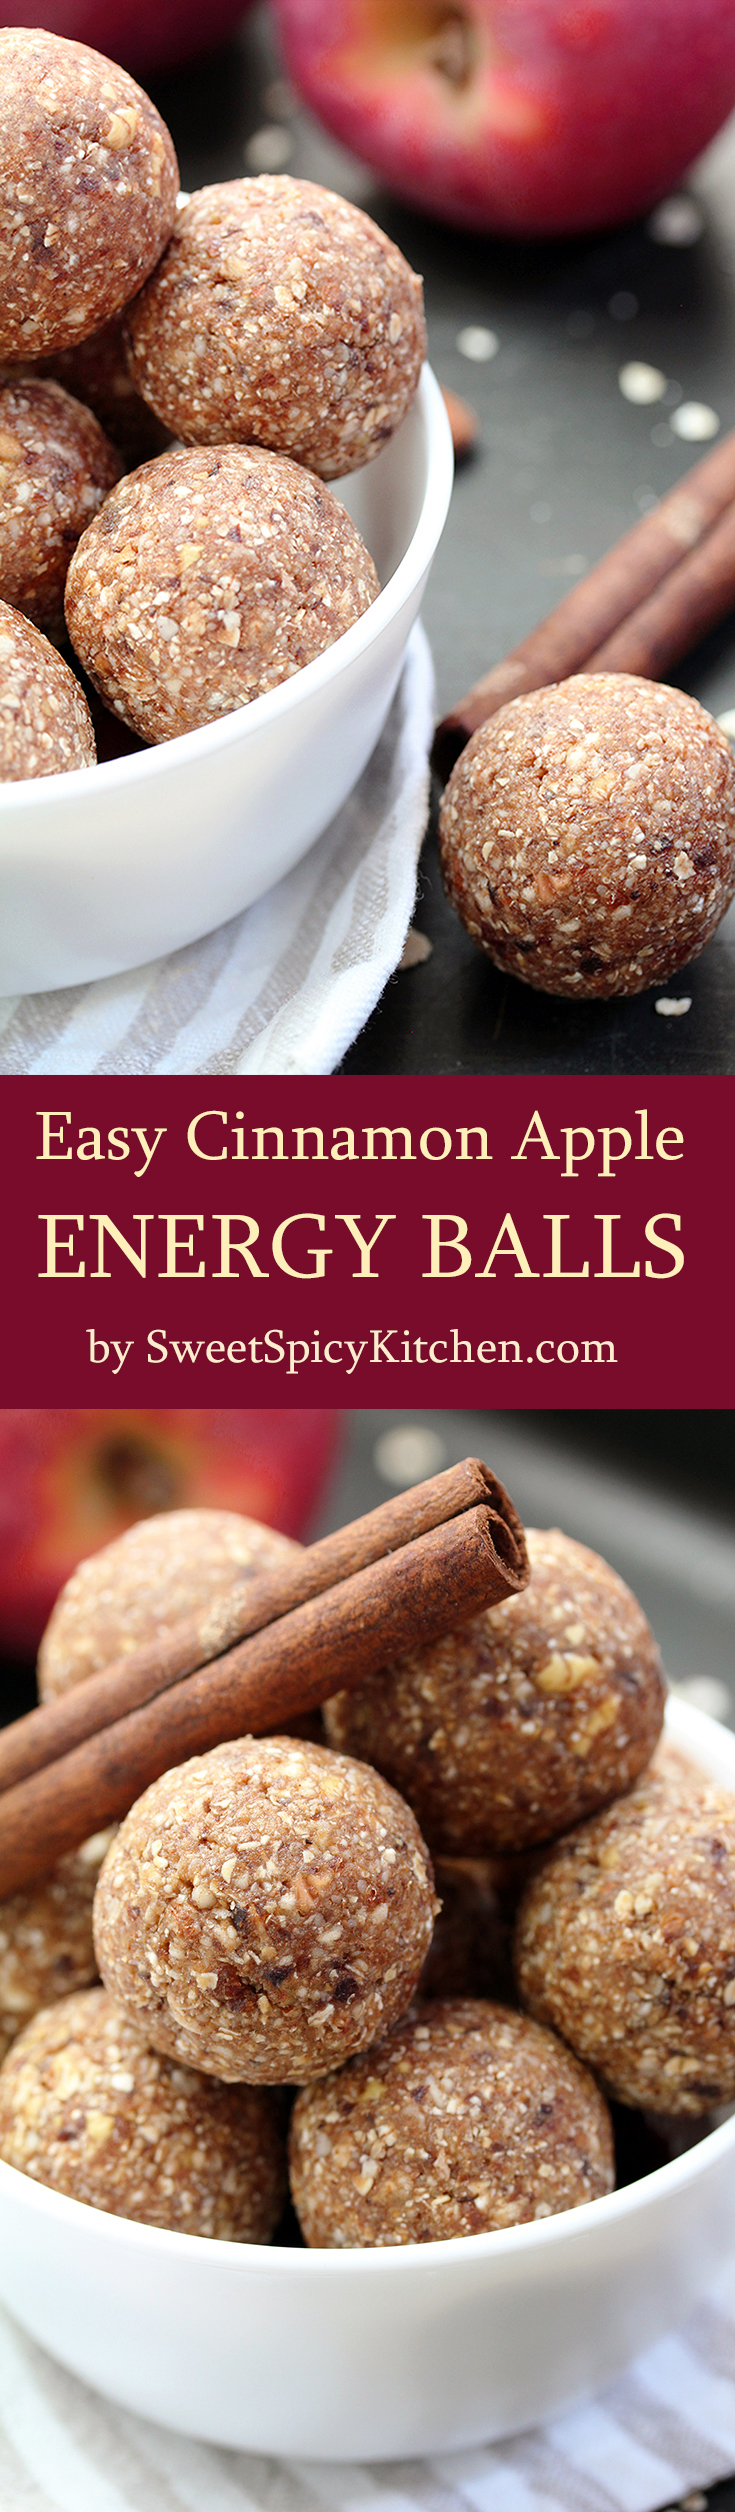 Easy Cinnamon Apple Energy Balls are light, delicious, nutritious, no bake balls, made of dried apples, dates, almonds, oat flakes, honey and cinnamon. Yummy!